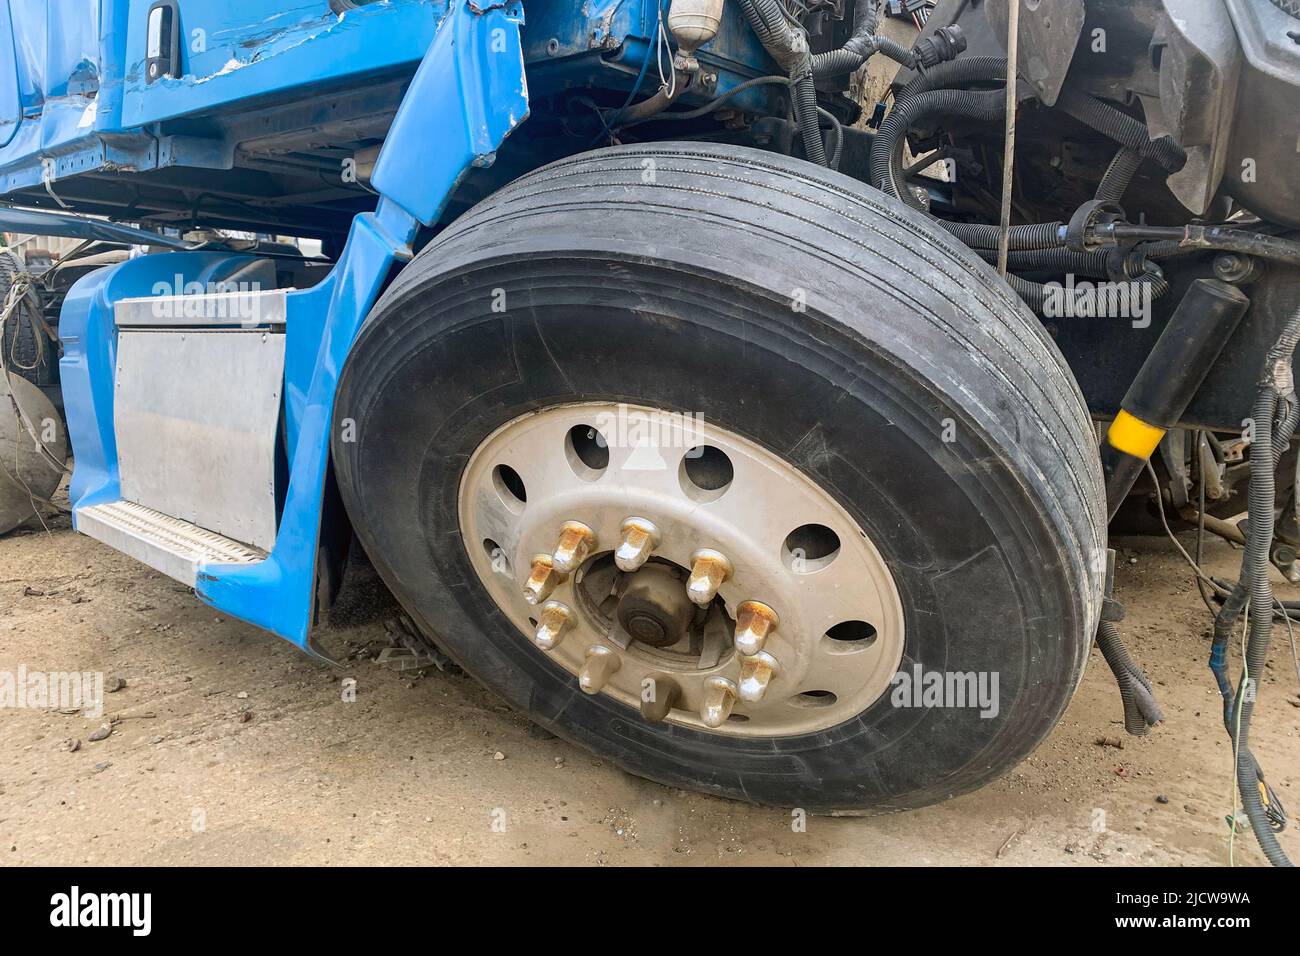 Closeup of abandoned truck in a junkyard, a blue lorry with a destroyed wheel and other parts after an accident on the road, big broken automobile on a junk yard. Stock Photo